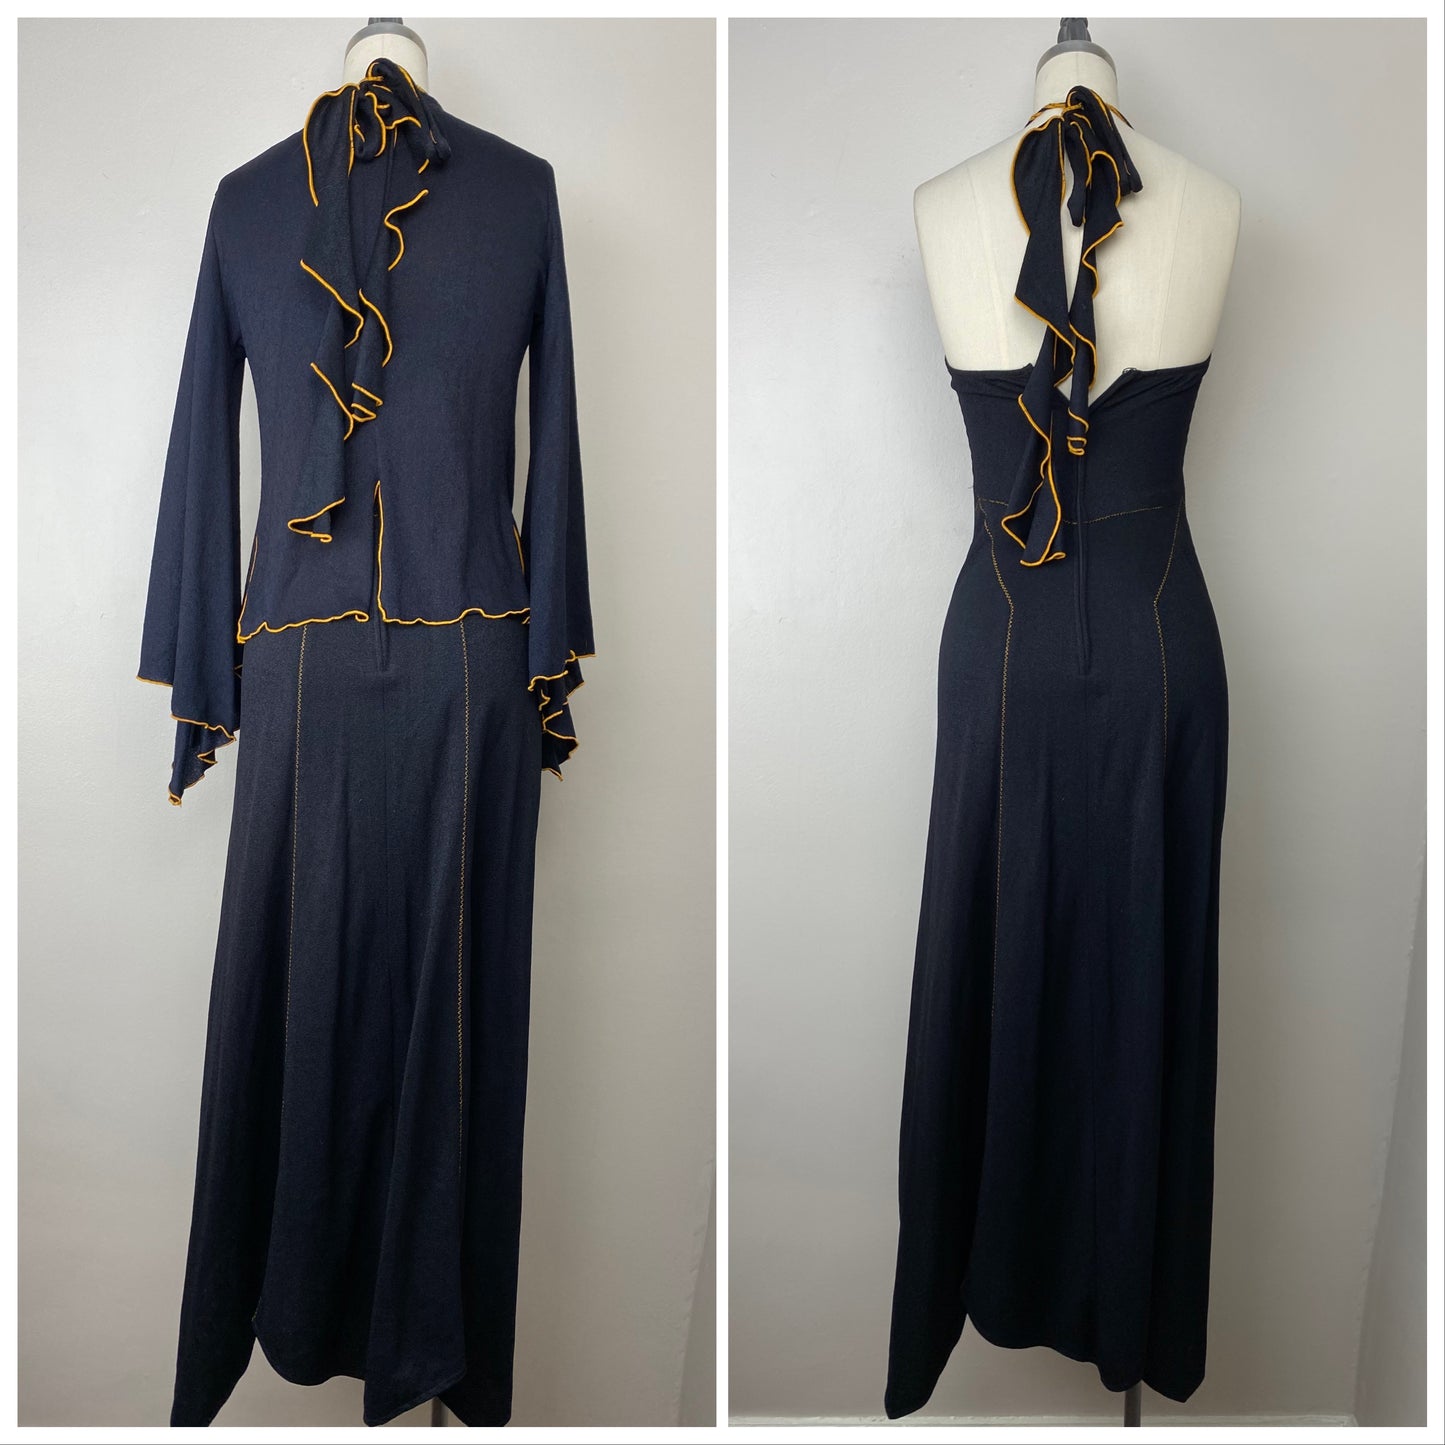 1970s Halter Dress with Matching Bell Sleeve Top, Snuggler Size XS/S